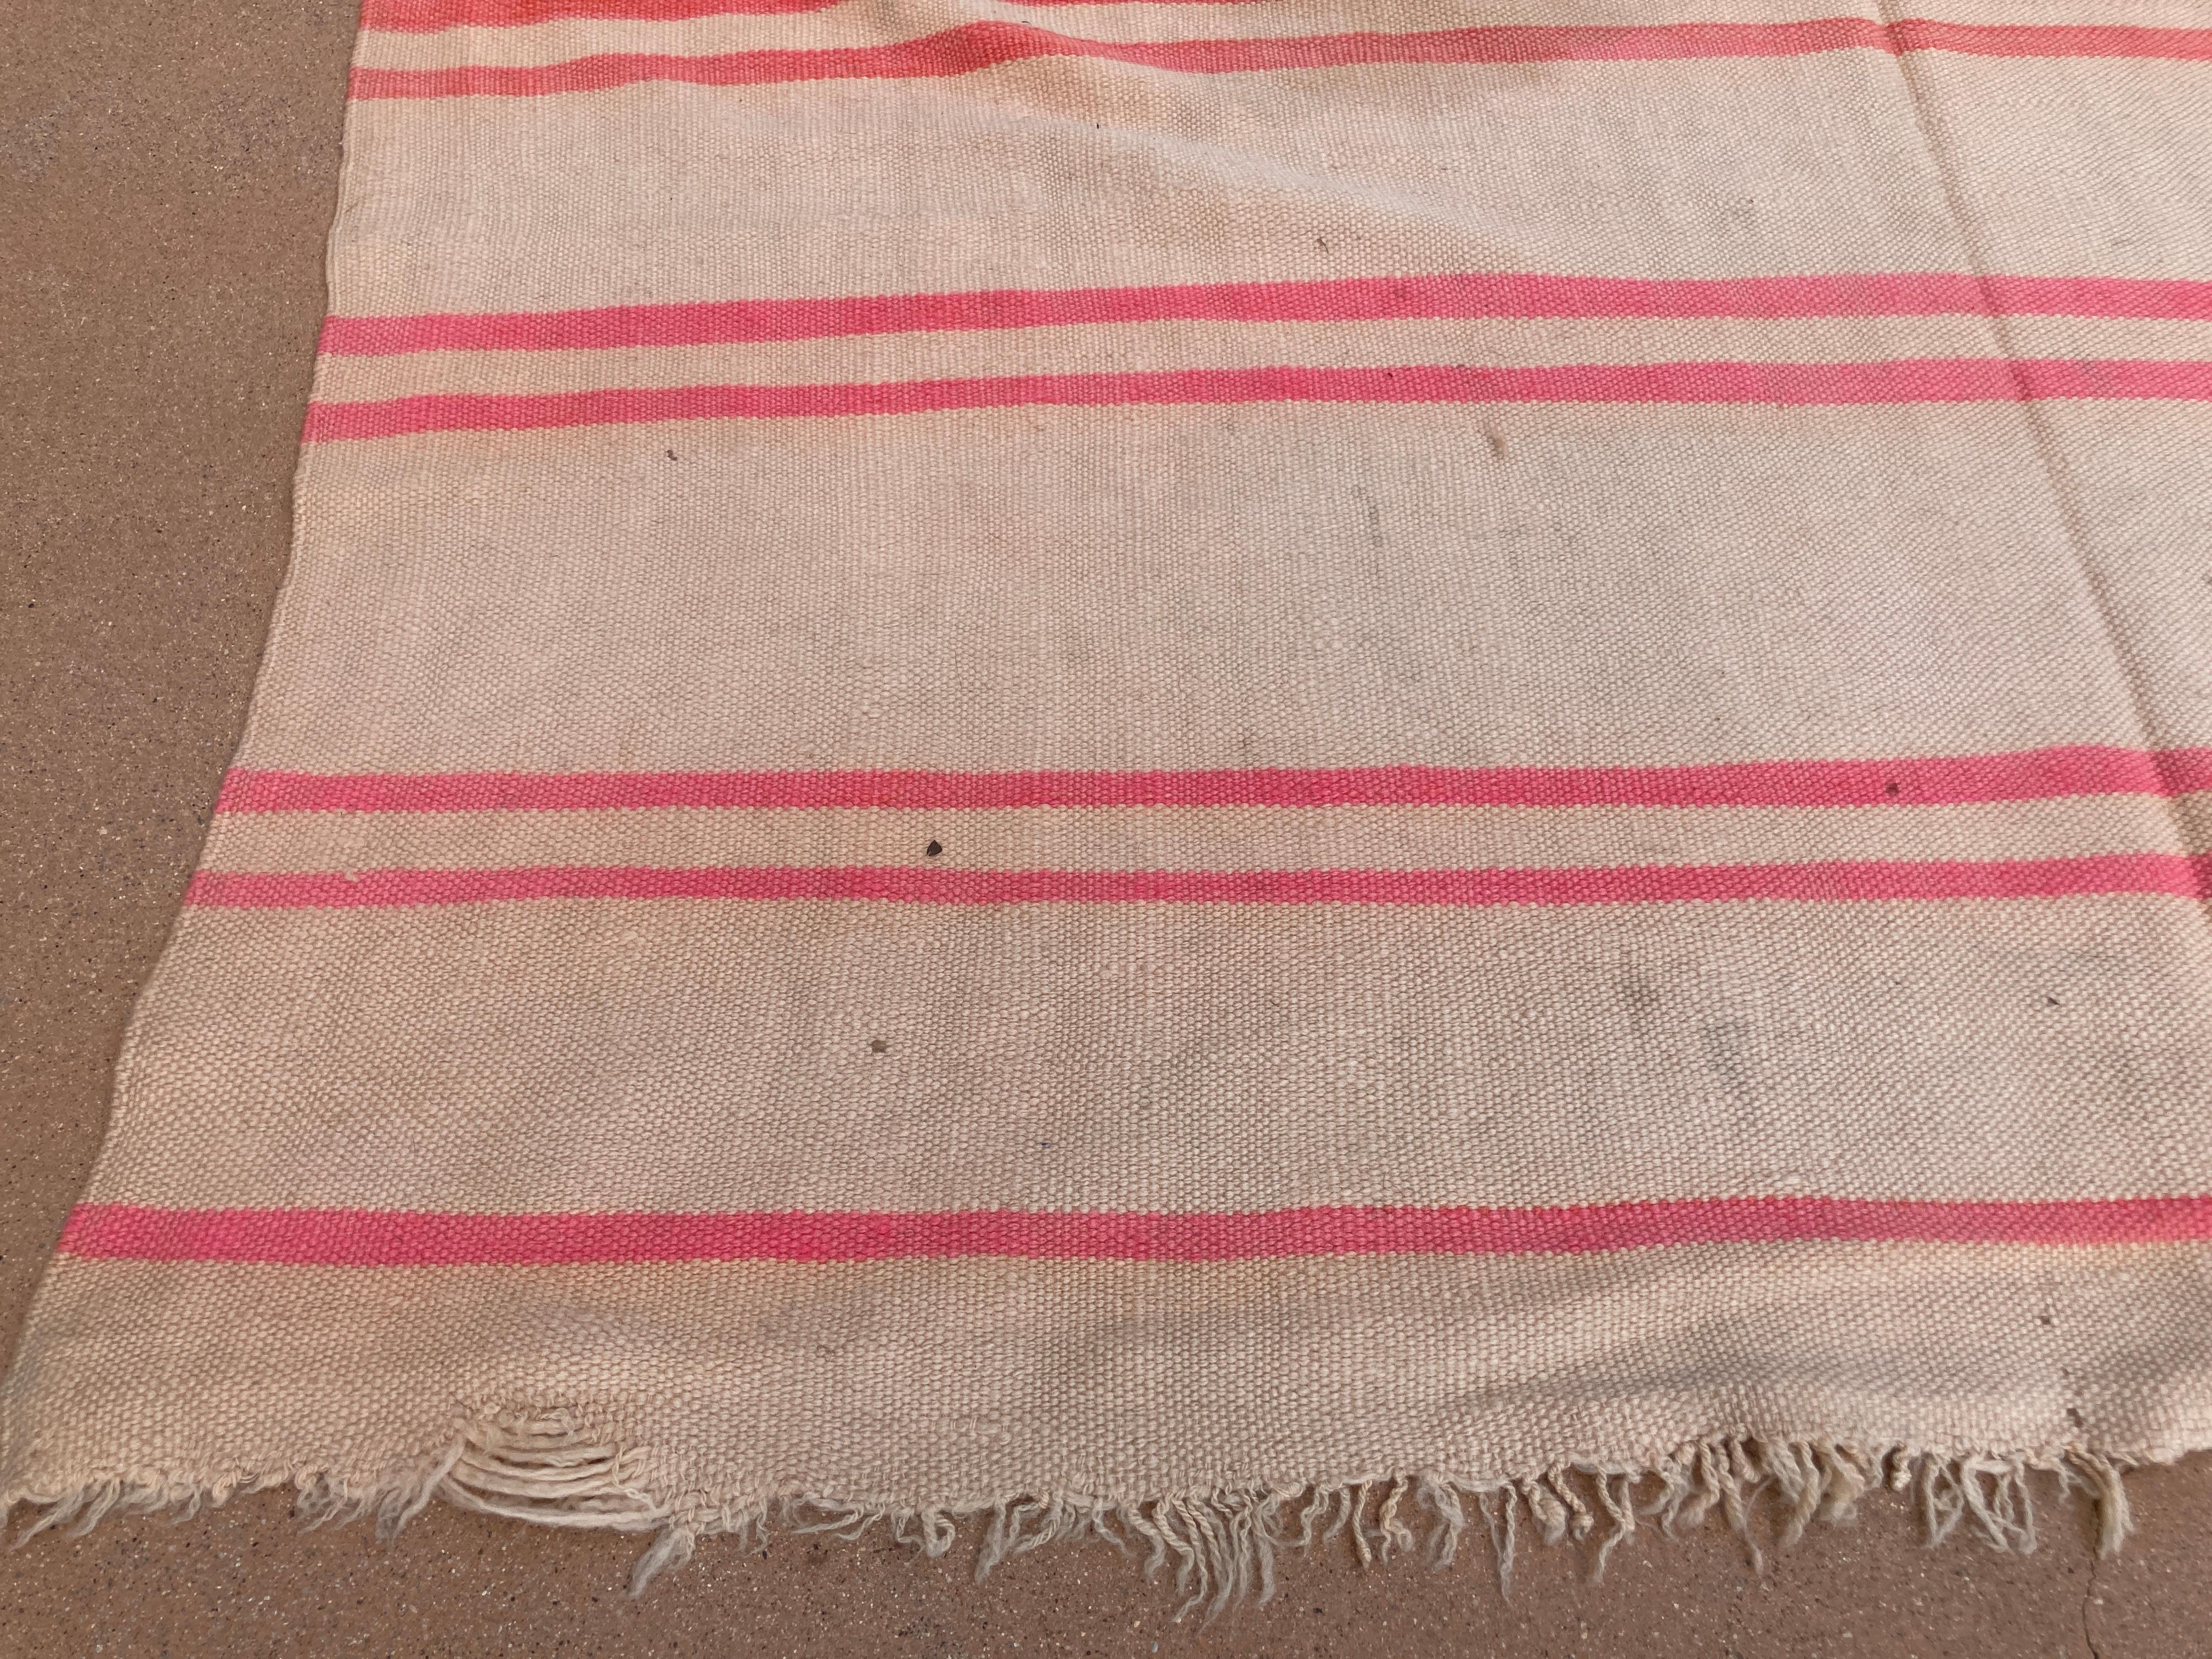 Moroccan Vintage Organic Hand-Woven Textile, circa 1960 In Fair Condition For Sale In North Hollywood, CA